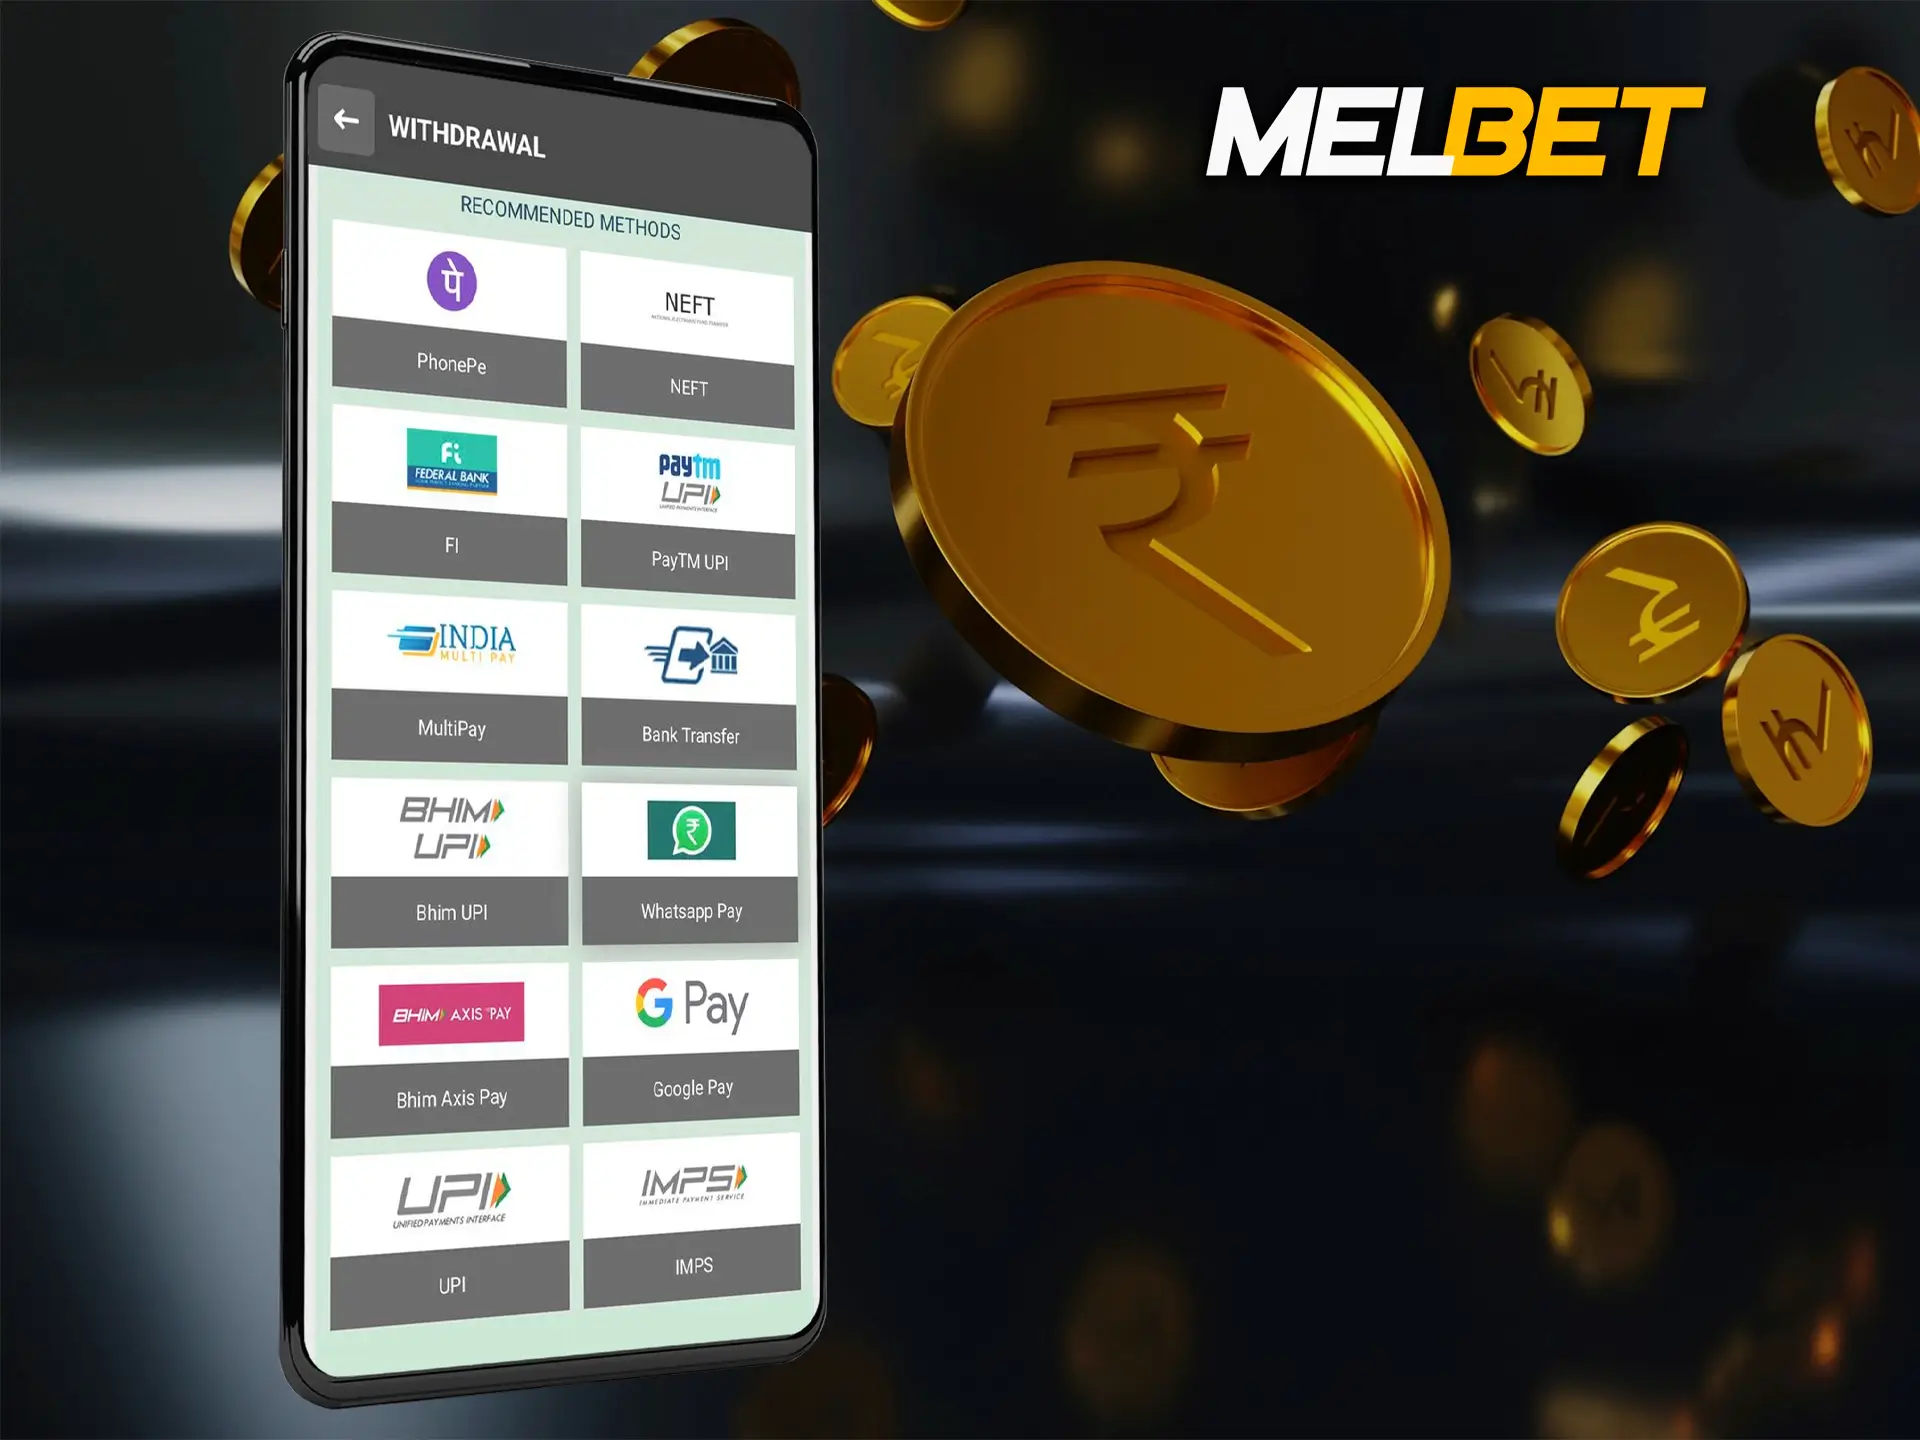 You can hear about Melbet and their fast withdrawals from any source.